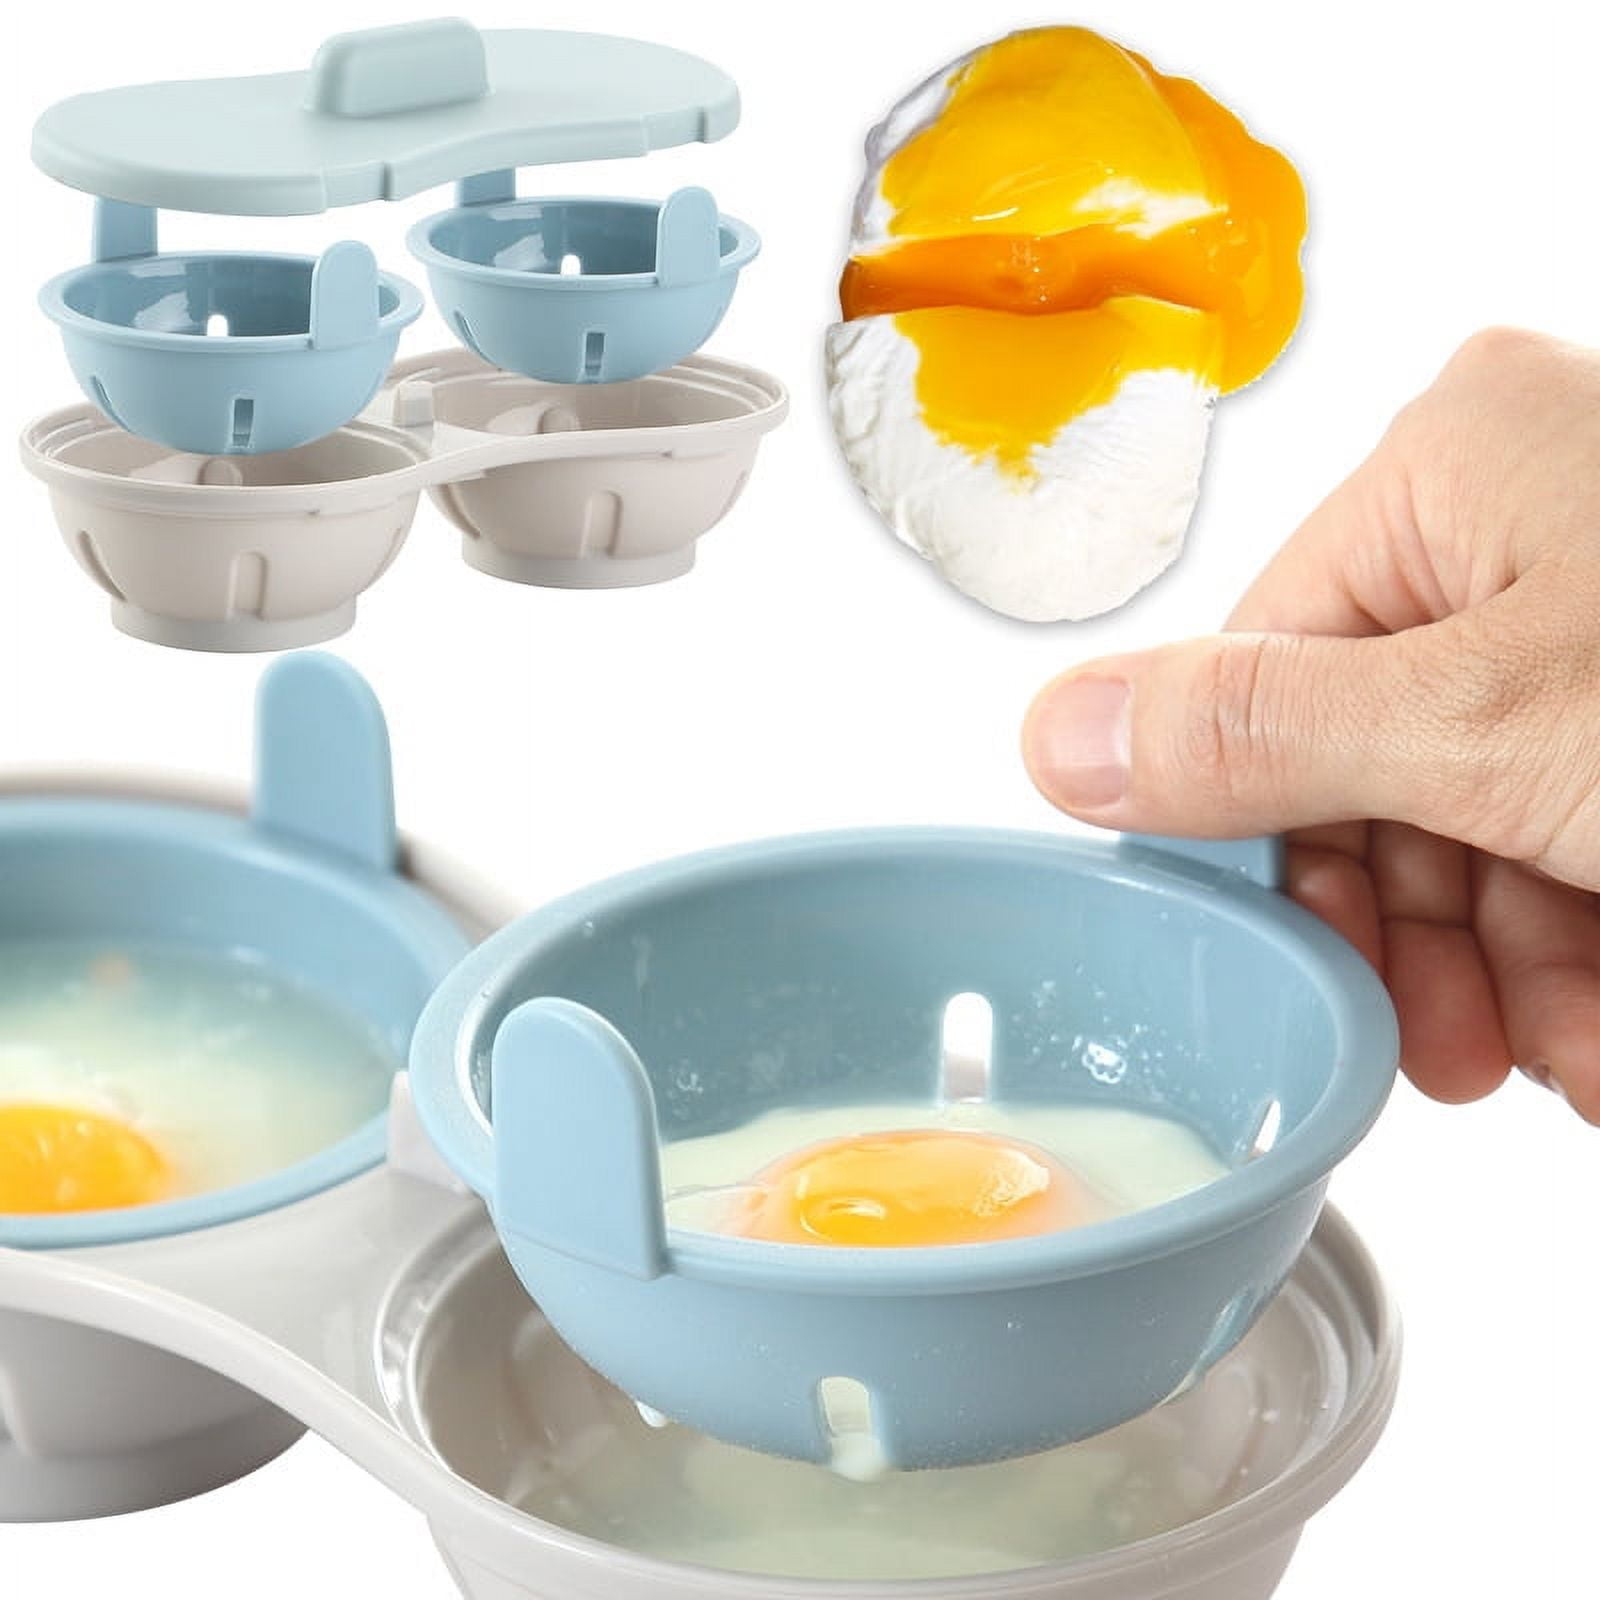 Microwave Egg Poacher- Silicone Double Egg Poaching Cups, Egg Maker  Poached, Egg Steamer Kitchen Gadget (Orange)